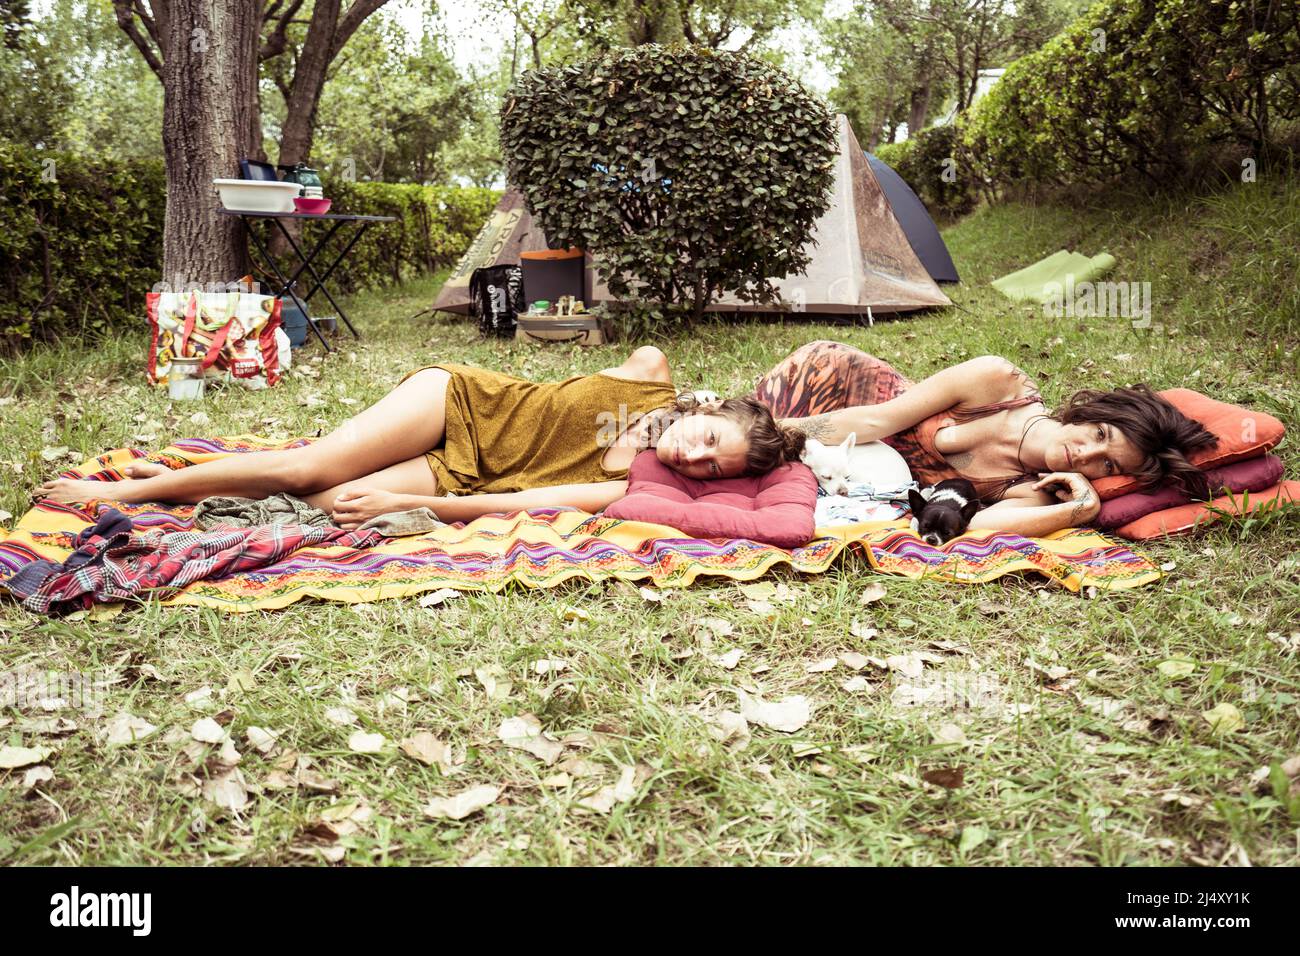 Two women relax together on grass in campsite in France Stock Photo